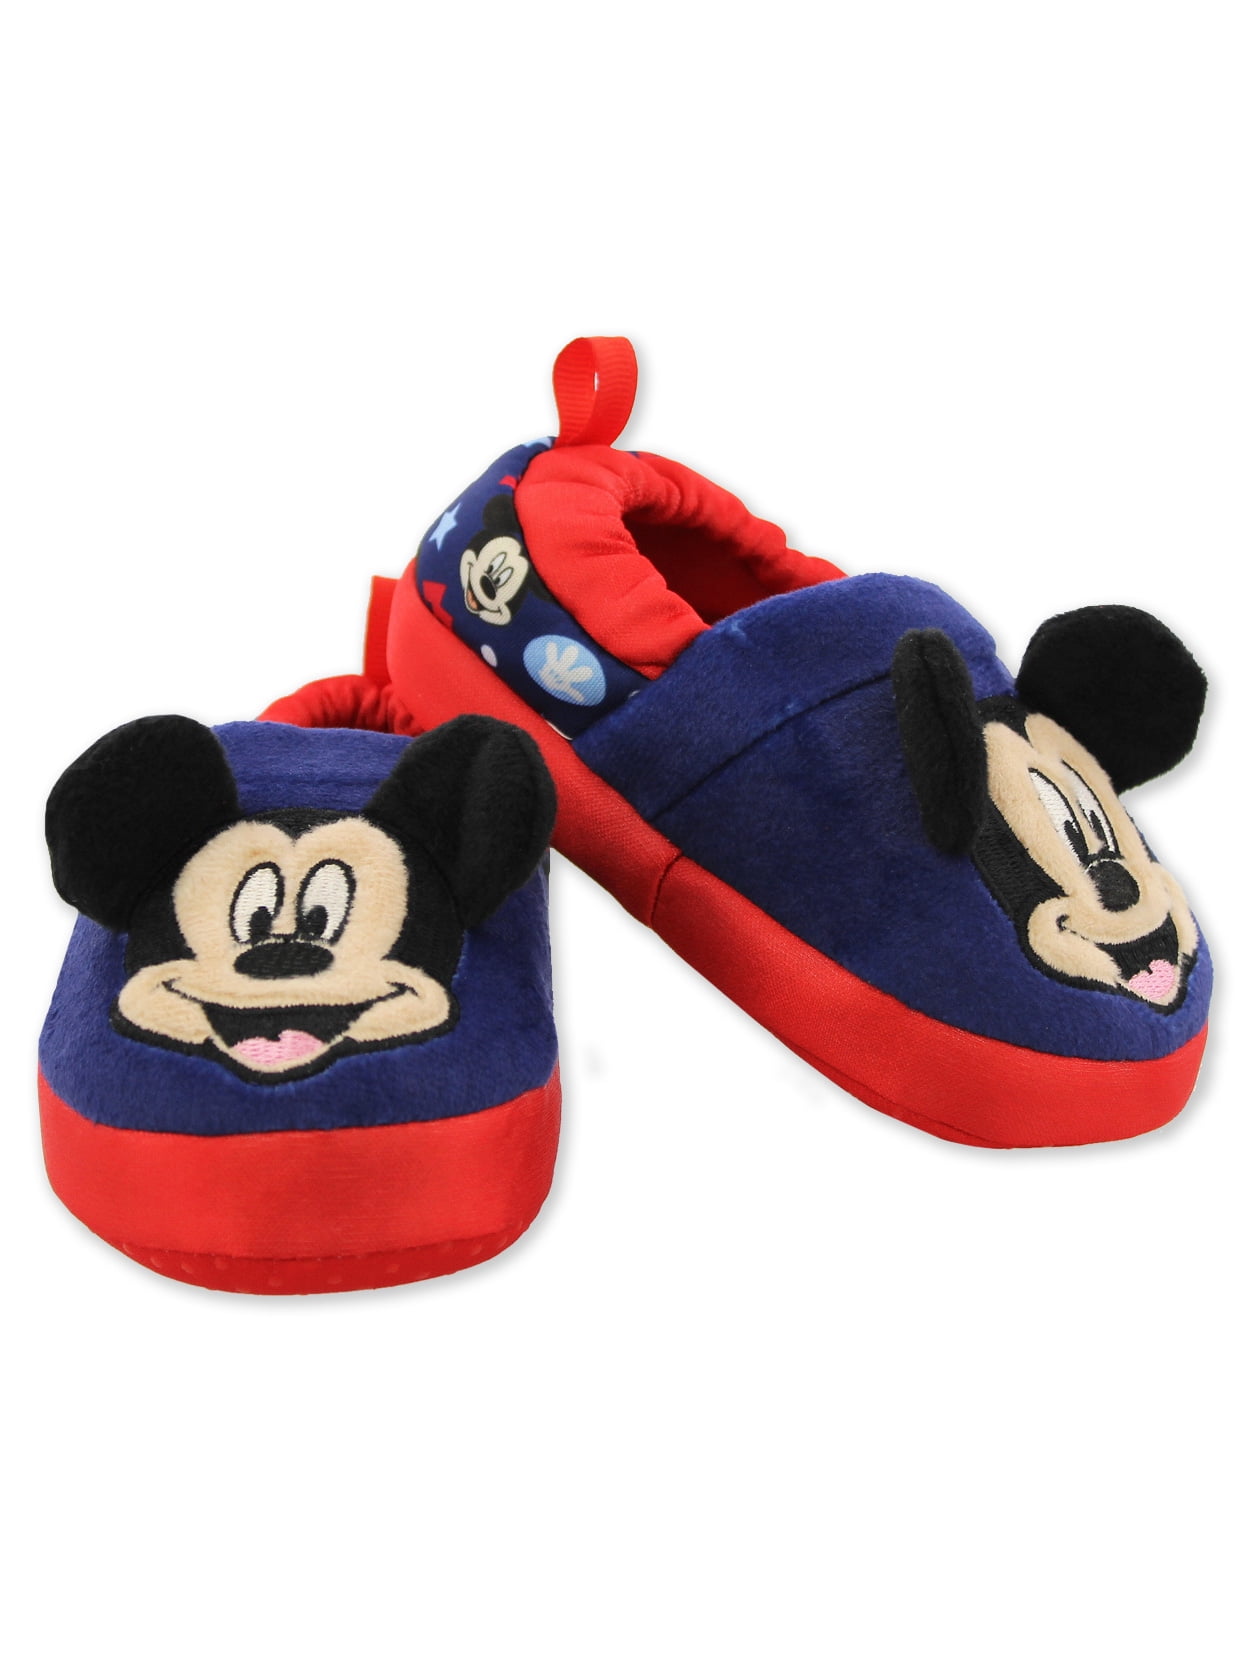 Discover 263+ boys mickey mouse slippers